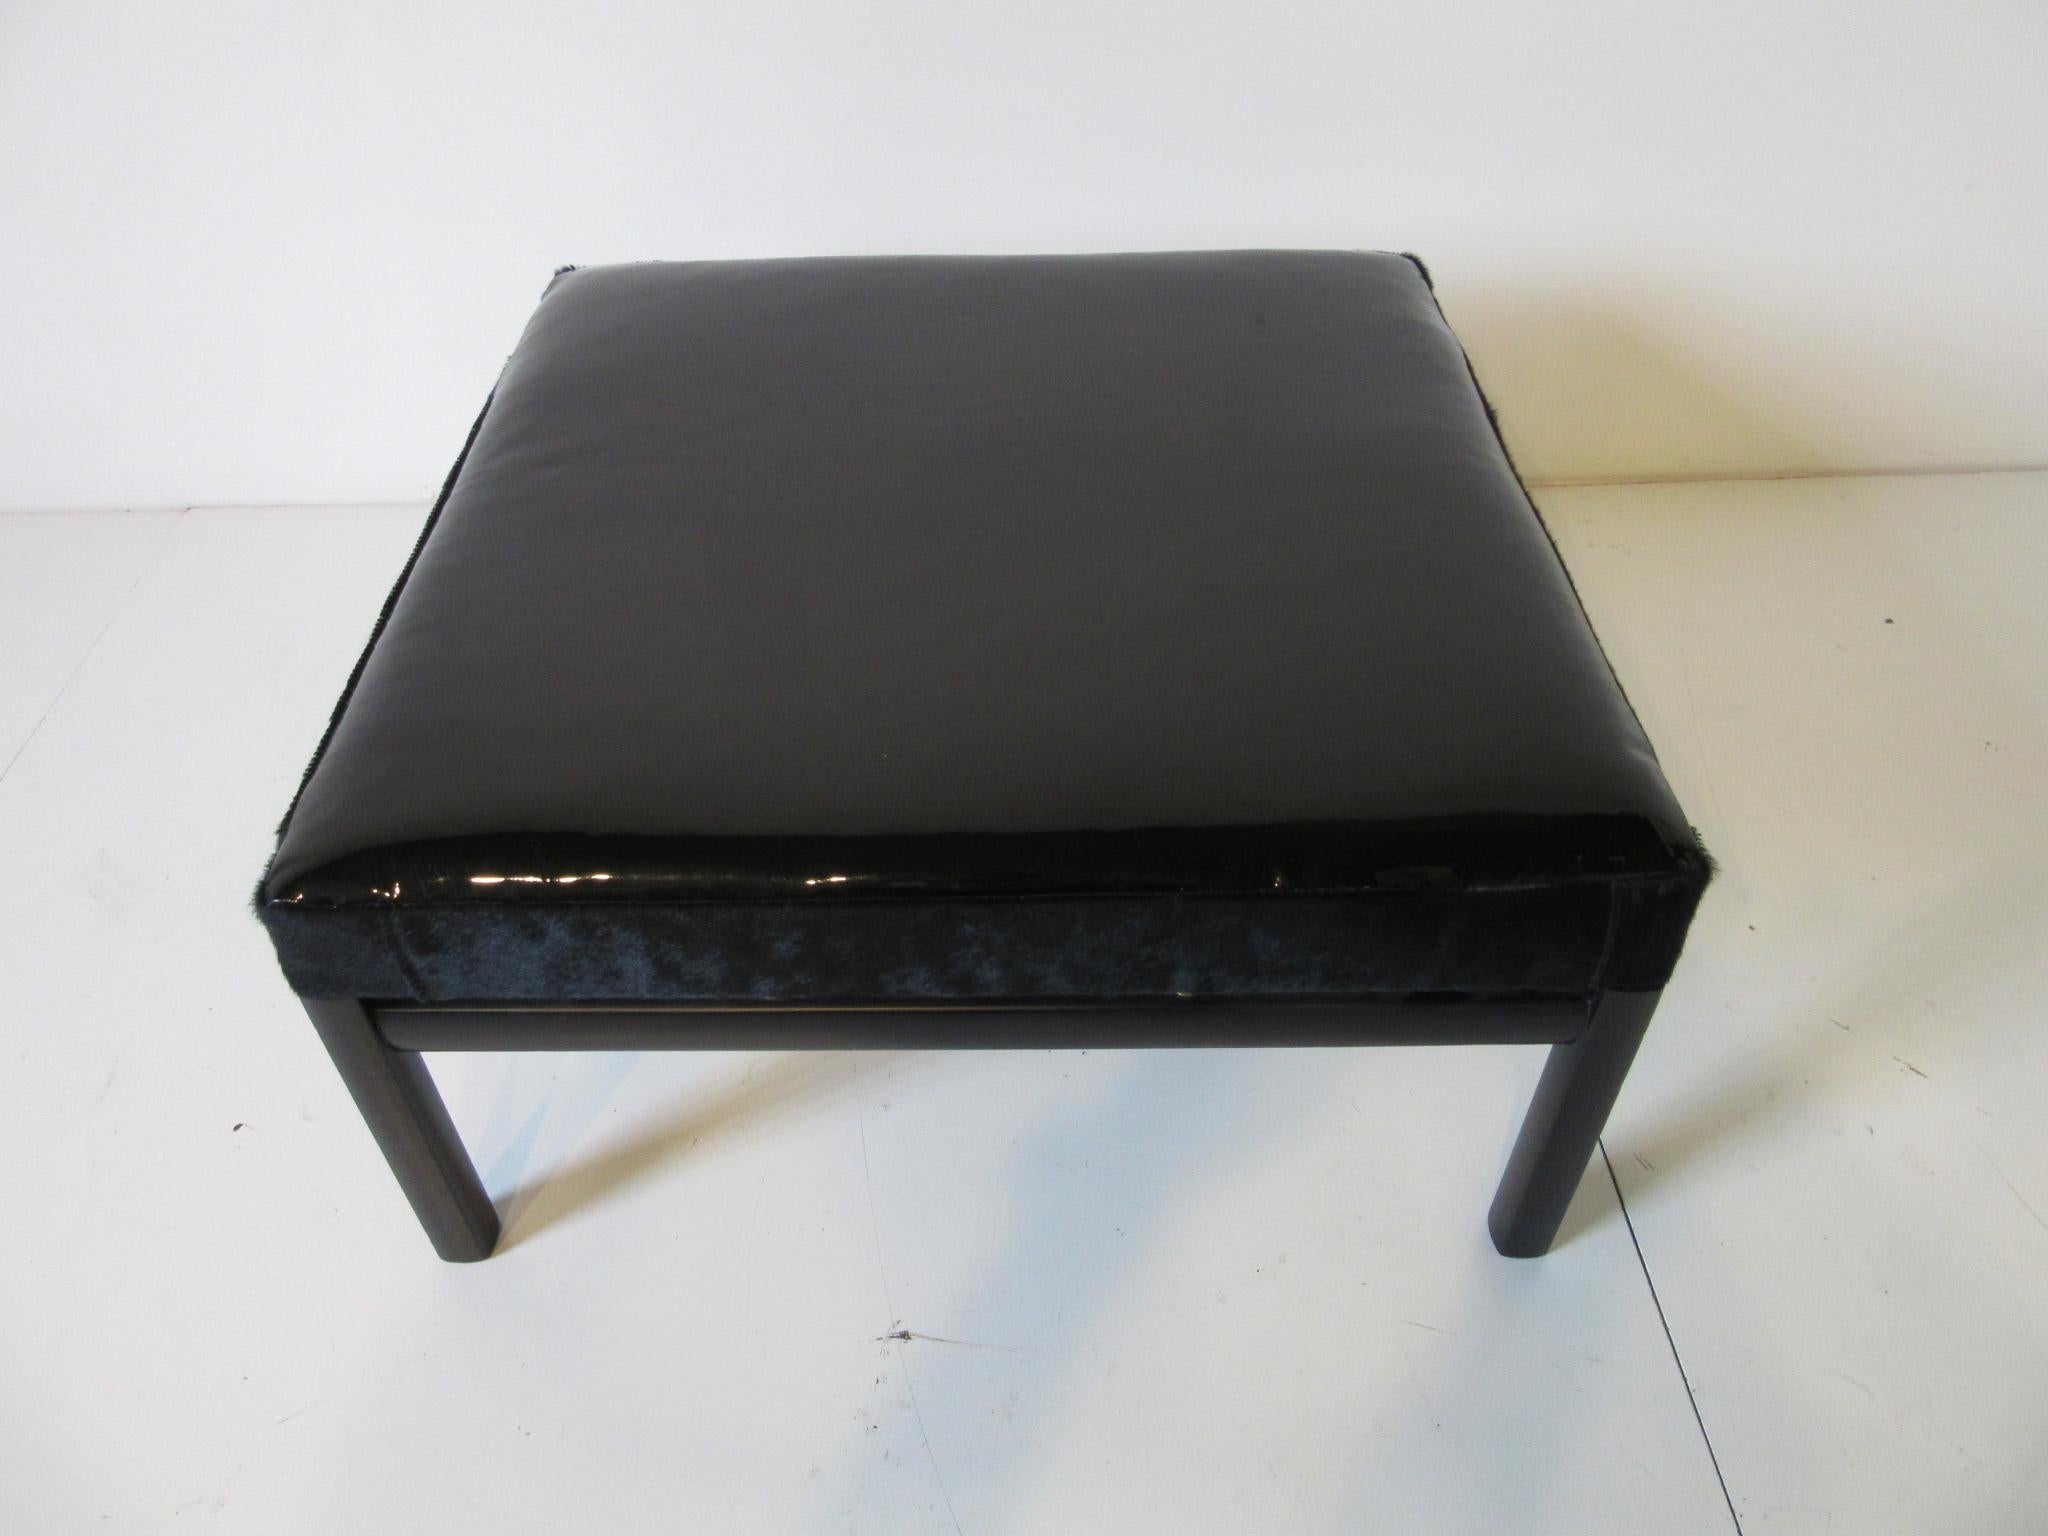 A ebony toned wood framed ottoman with brass details, upholstered in black patent leather, sides trimmed in black pony hide. A stunning twist on a great design by Baker and Micheal Taylor.